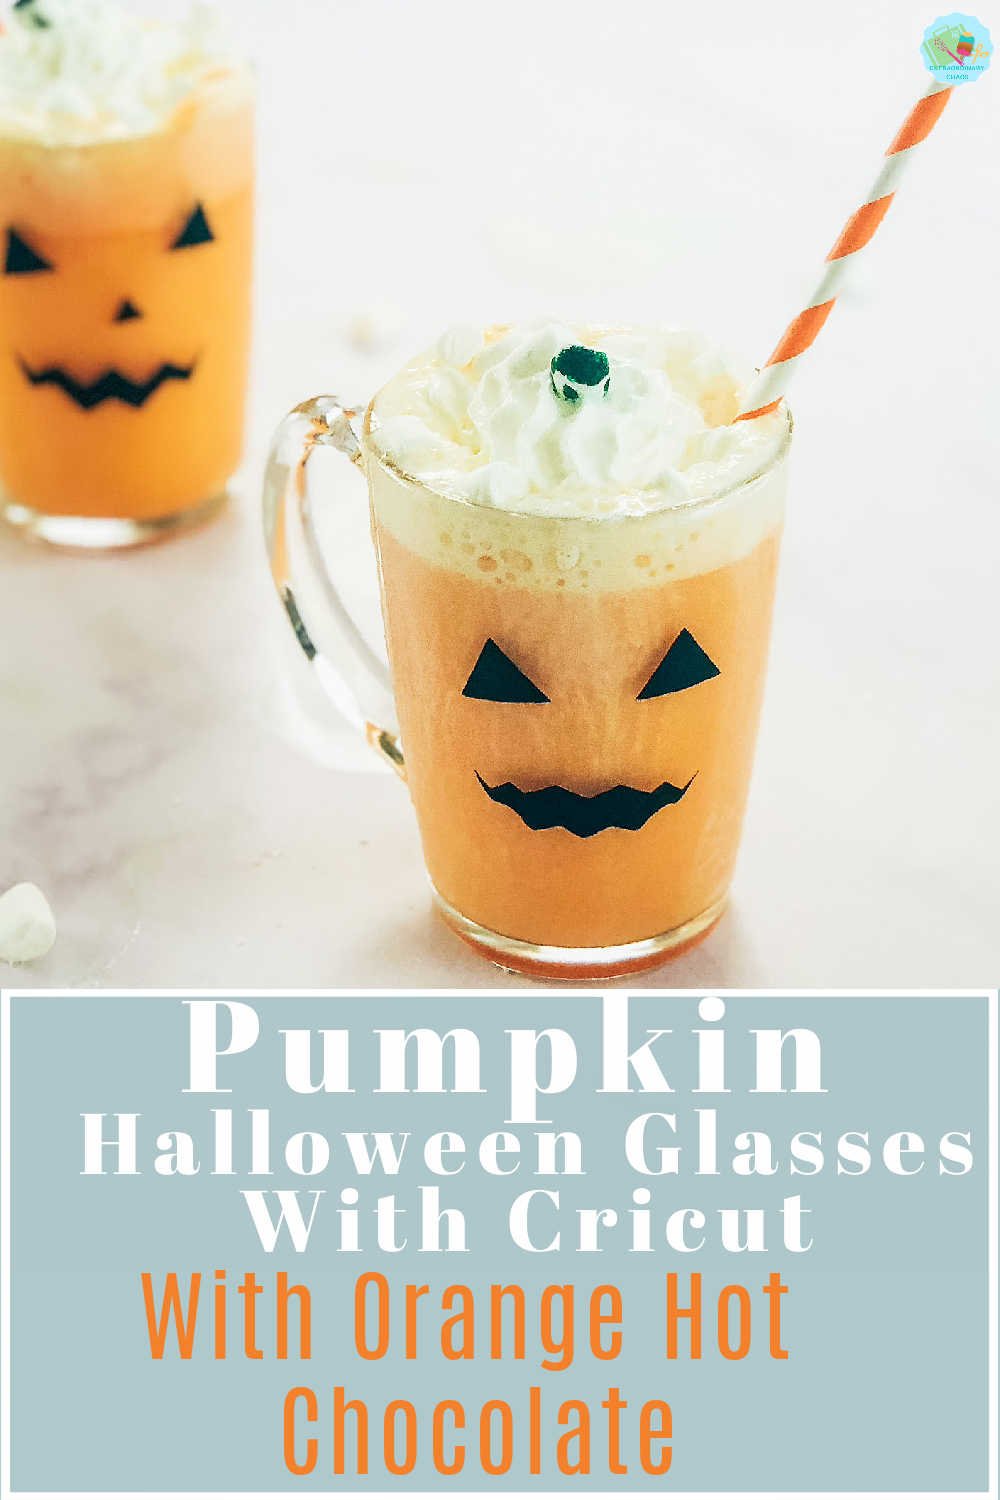 How to make spooky Pumpkin face Halloween Glasses with Cricut Vinyl with Orange hot chocolate topped with cream